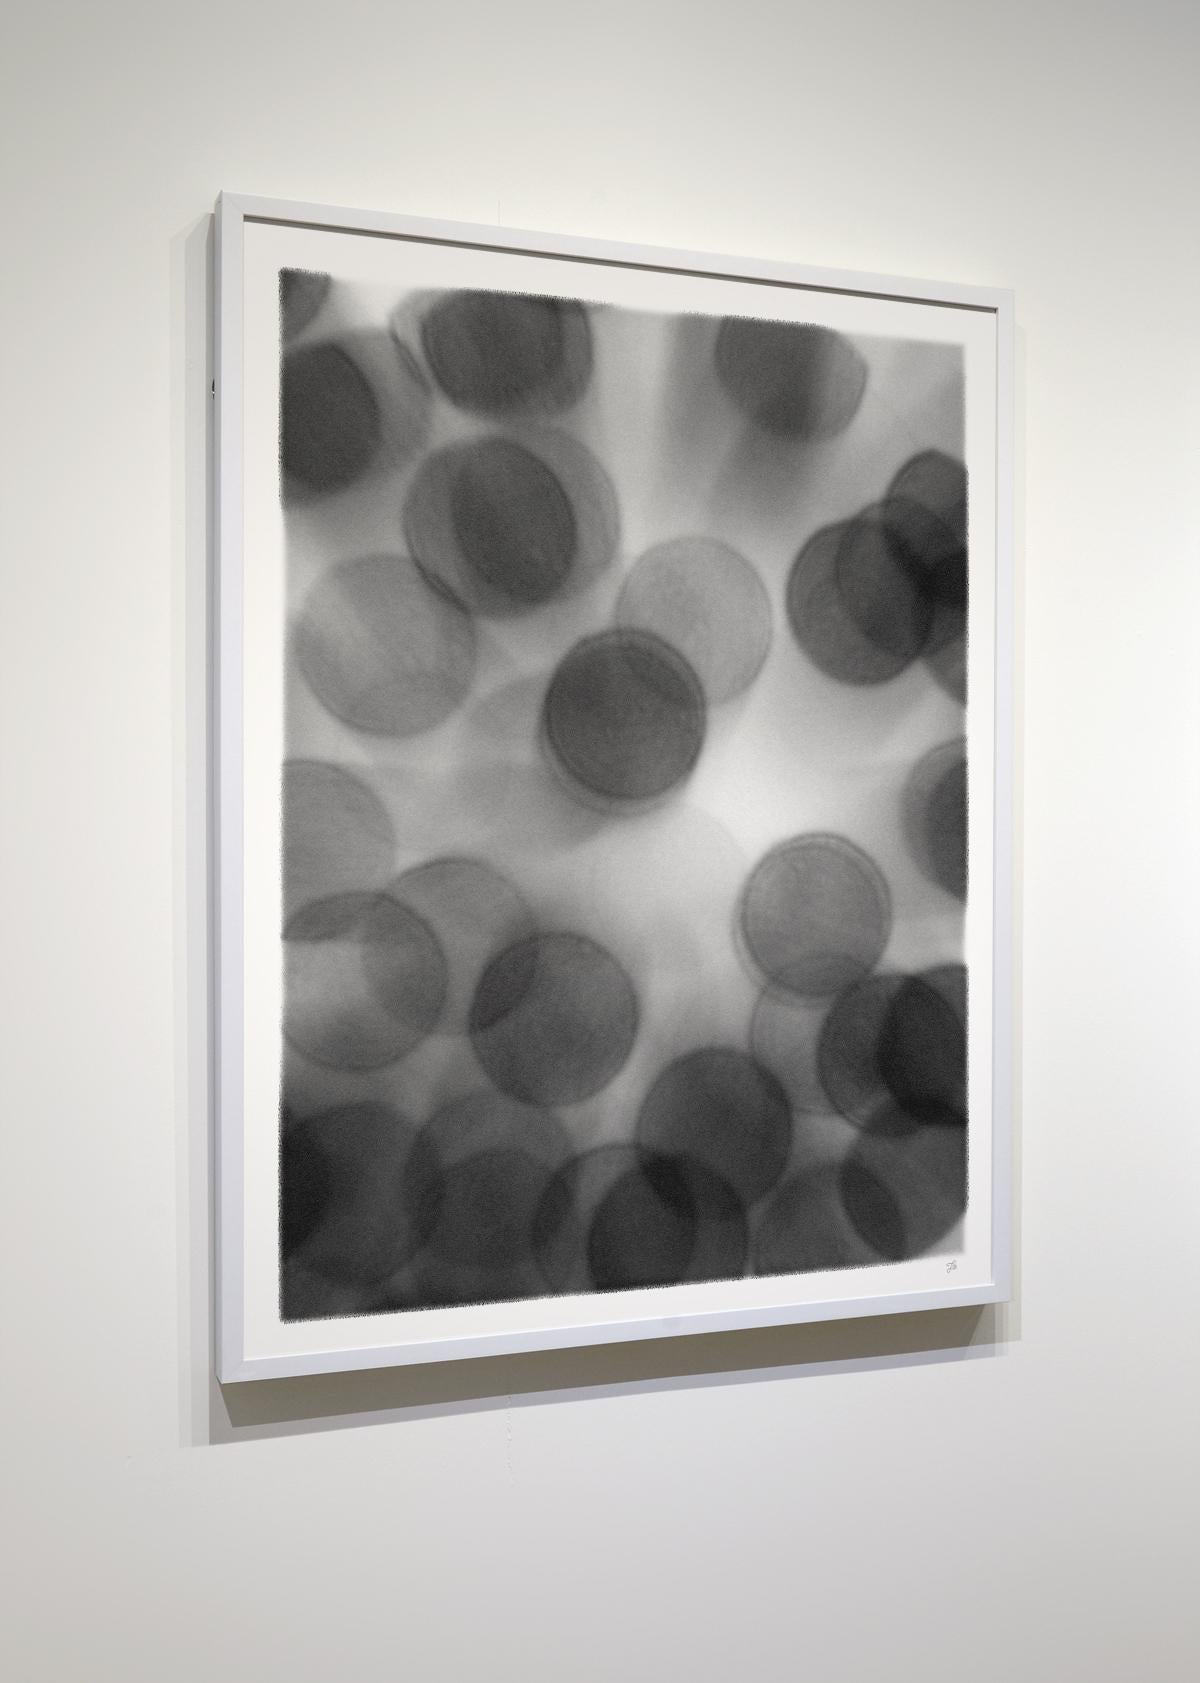 Underlight Studies, #36 by Lois White, archival pigment print, 40x52in For Sale 3